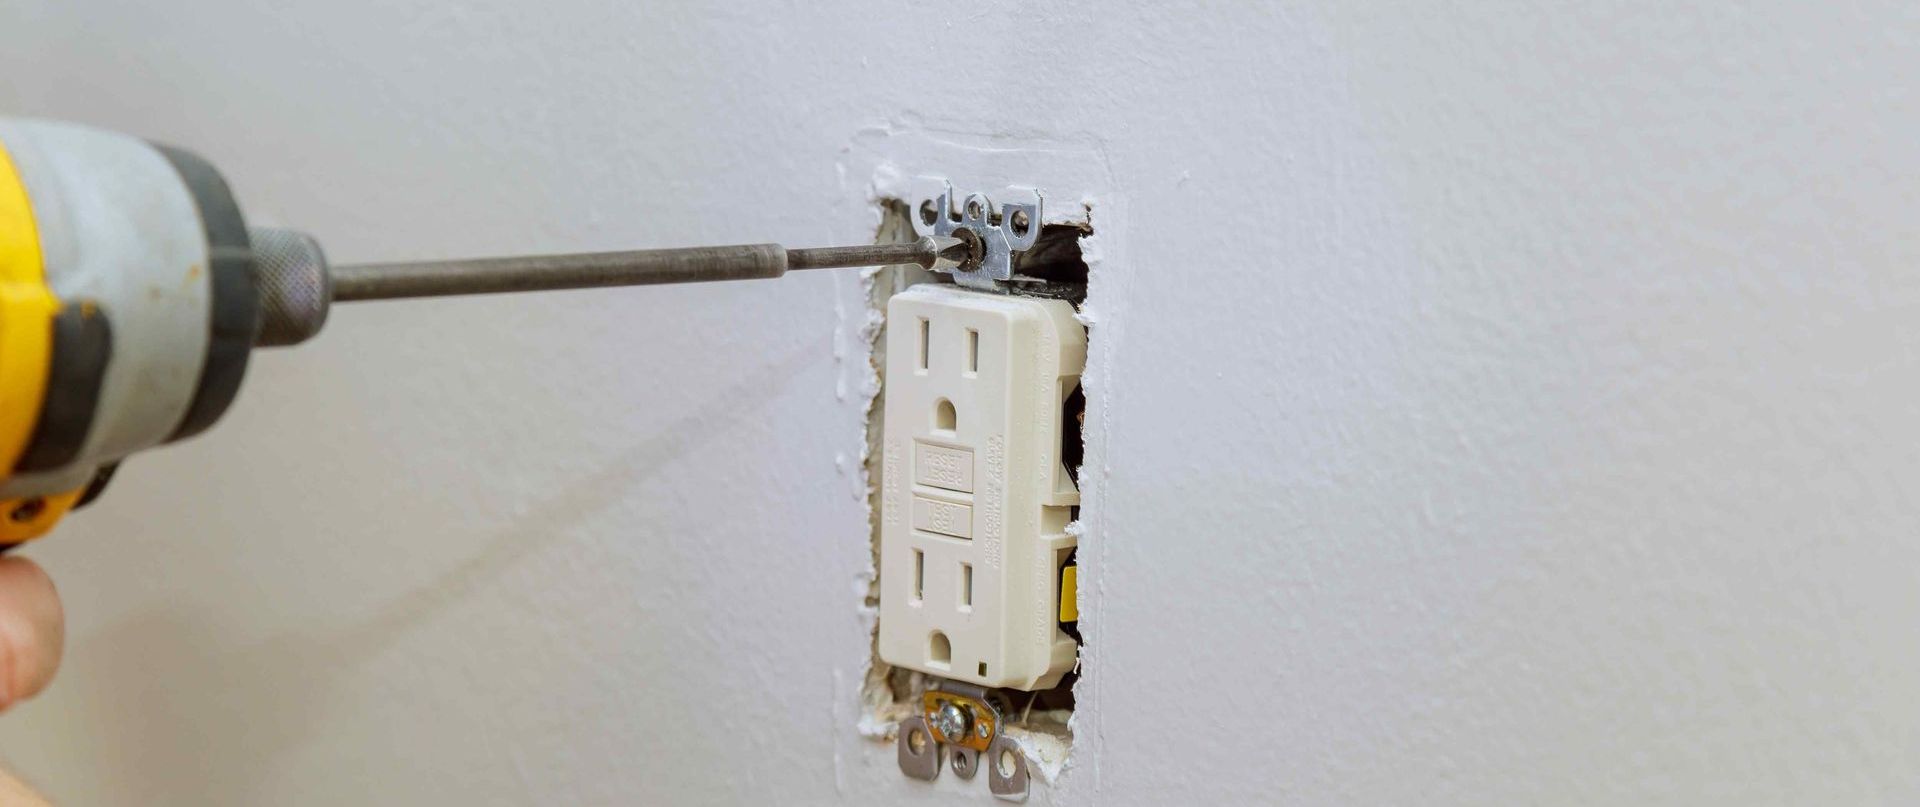 Installing GFCI Outlet